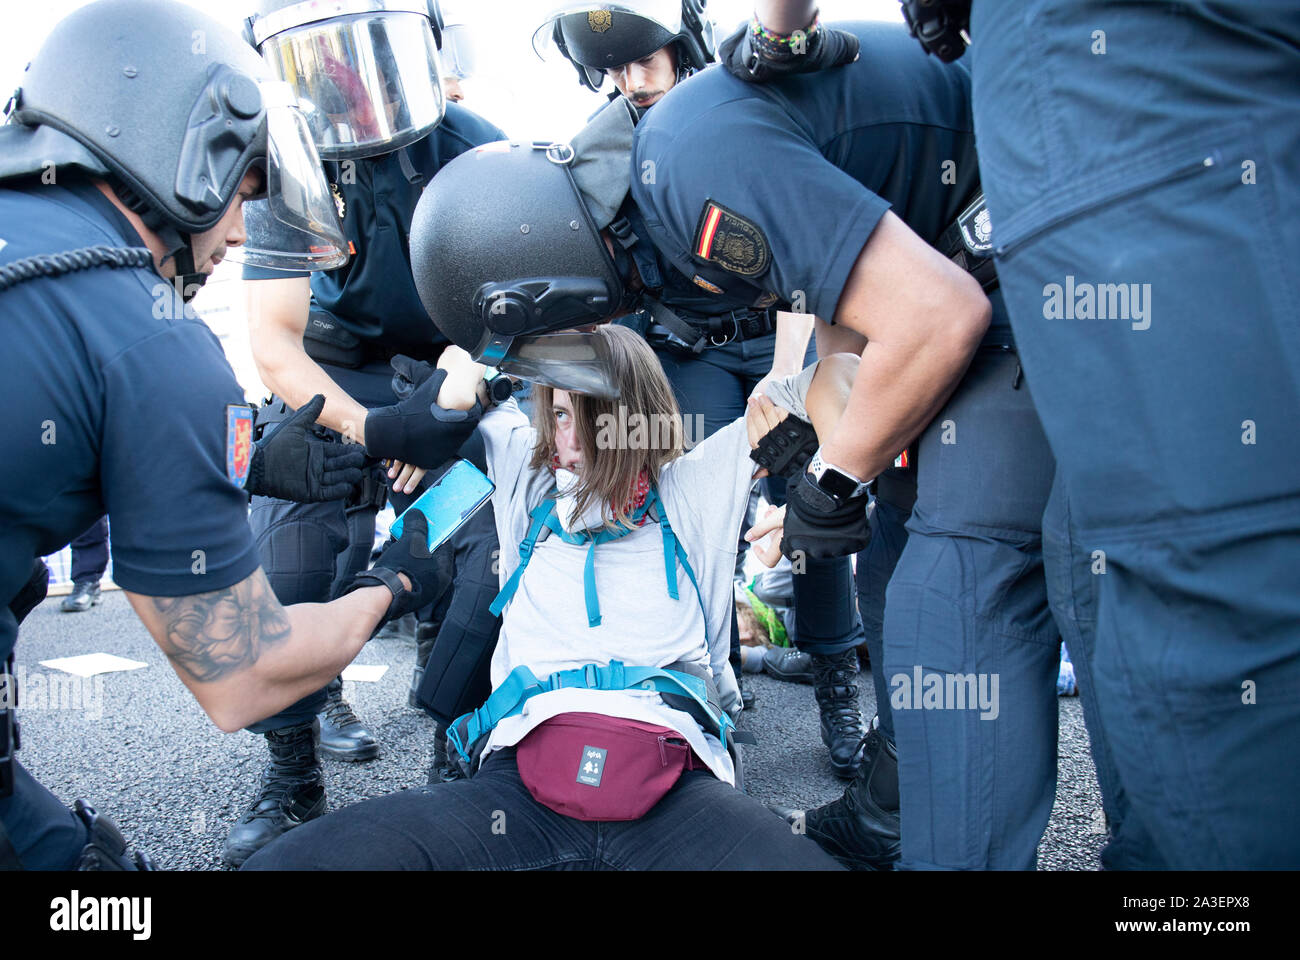 Police officers arrest an activist during the protest.Cities worldwide like London, Berlin, New York, Buenos Aires, París started the second international week rebellion while activists perform in different actions of pacific protests and civil disobedience under the ethical duty to reclaim responsibility a political action for the purpose of mitigate the serious consequences of climate change and ecological impact. In Madrid they were two parallel actions, one in “Paseo de la Castellana”, where a main road was blocked for a human chain and there were some activists who were arrested and the s Stock Photo